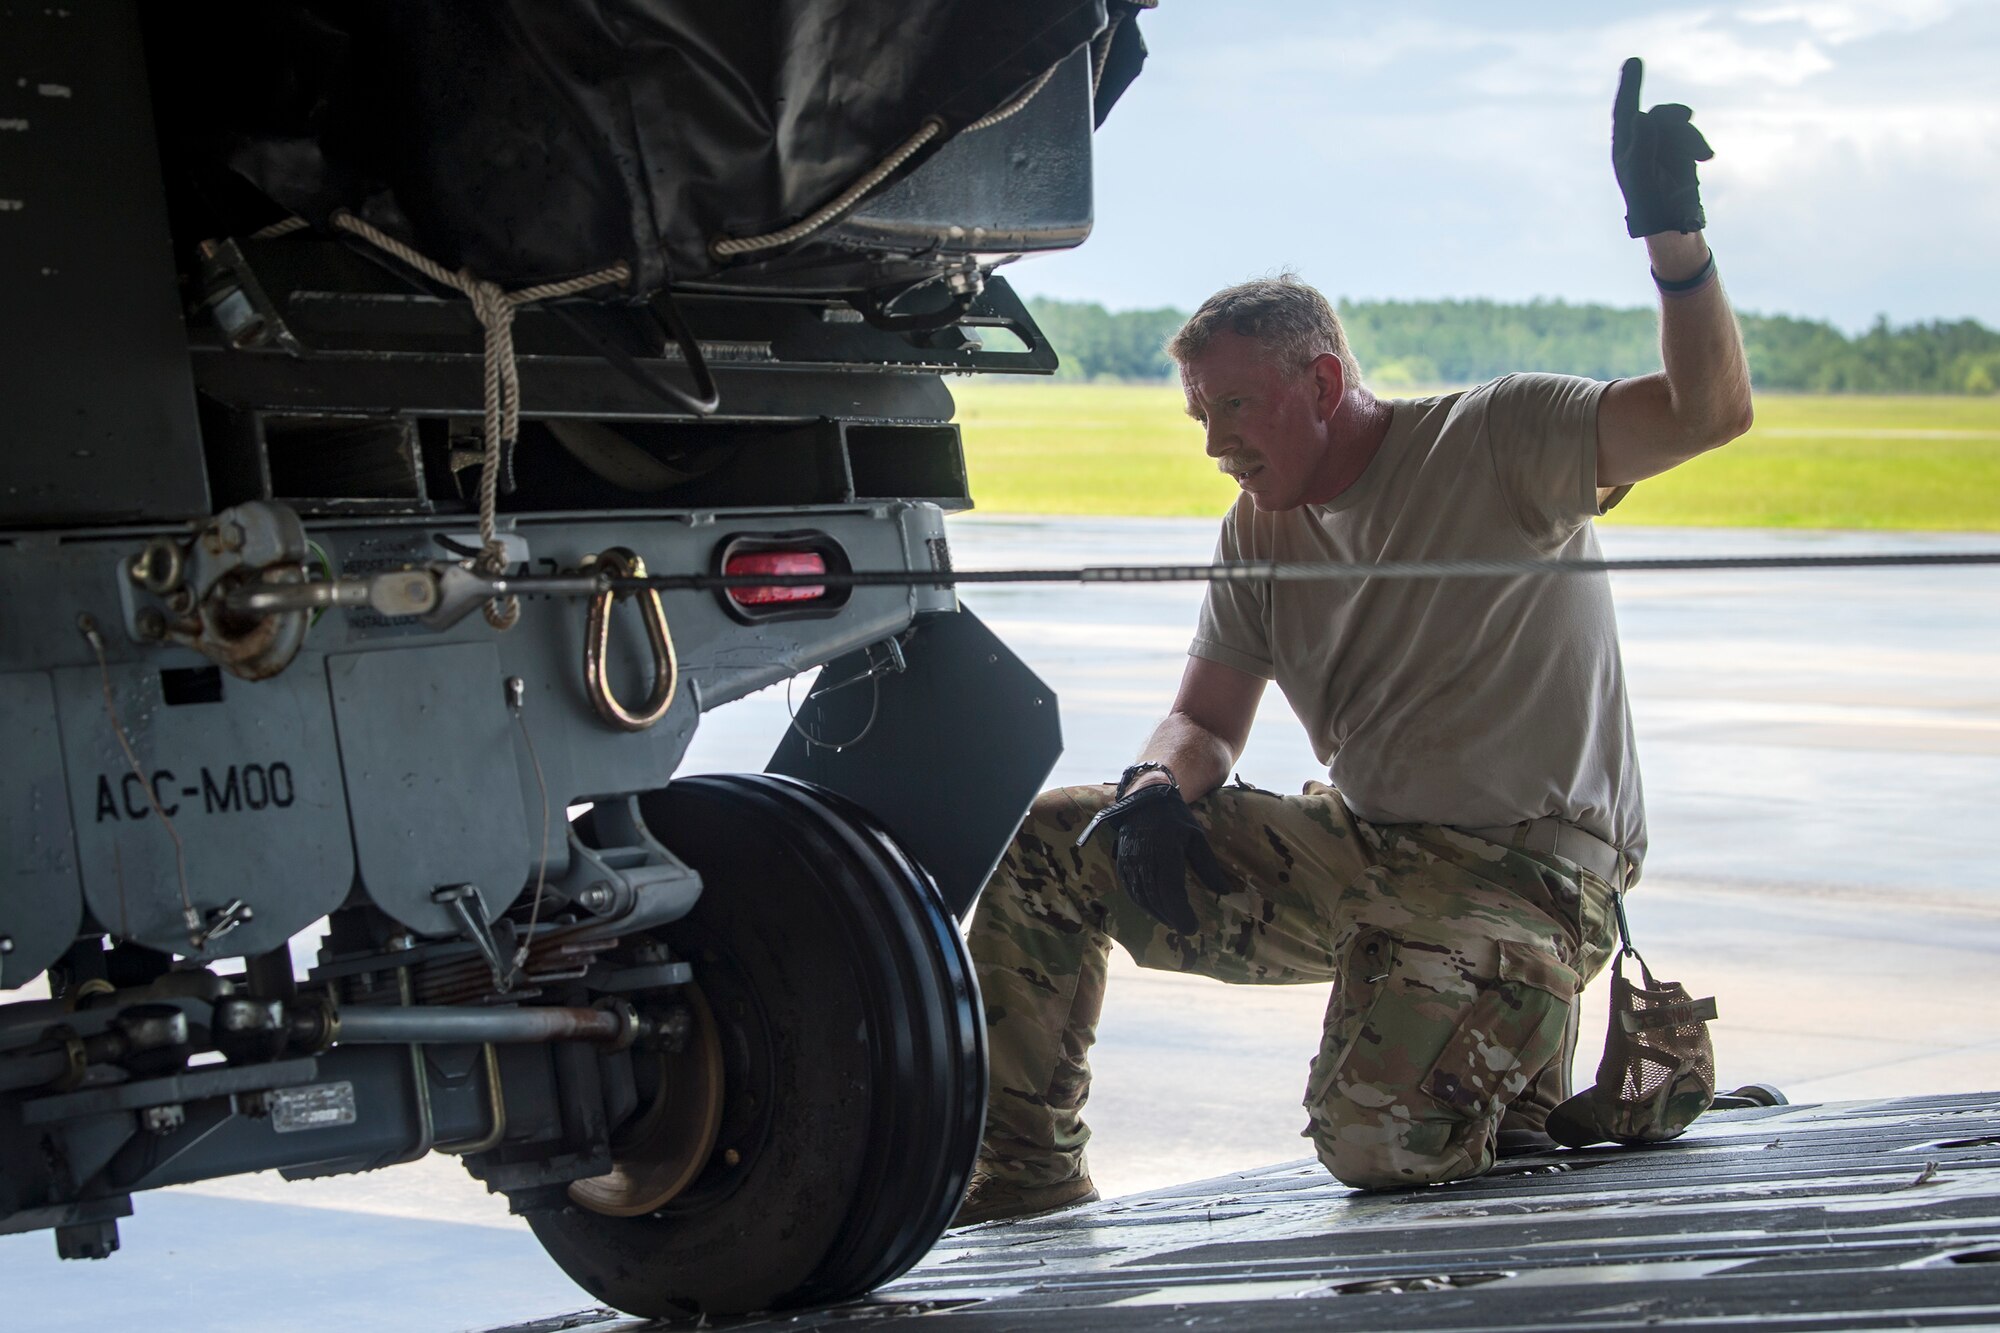 Master Sgt. Robert Kinsley, 155th Airlift Squadron loadmaster, Memphis Air National Guard Base, TN, signals to move cargo, July 5, 2018, at Moody Air Force Base, Ga. Airmen loaded approximately 68,000 pounds of cargo onto a C-17 Globemaster III to aid the 75th Fighter Squadron (FS) prior to a deployment. The 75th FS and supporting units recently deployed to an undisclosed location in support of Operation Spartan Shield. (U.S. Air Force photo by Airman 1st Class Eugene Oliver)